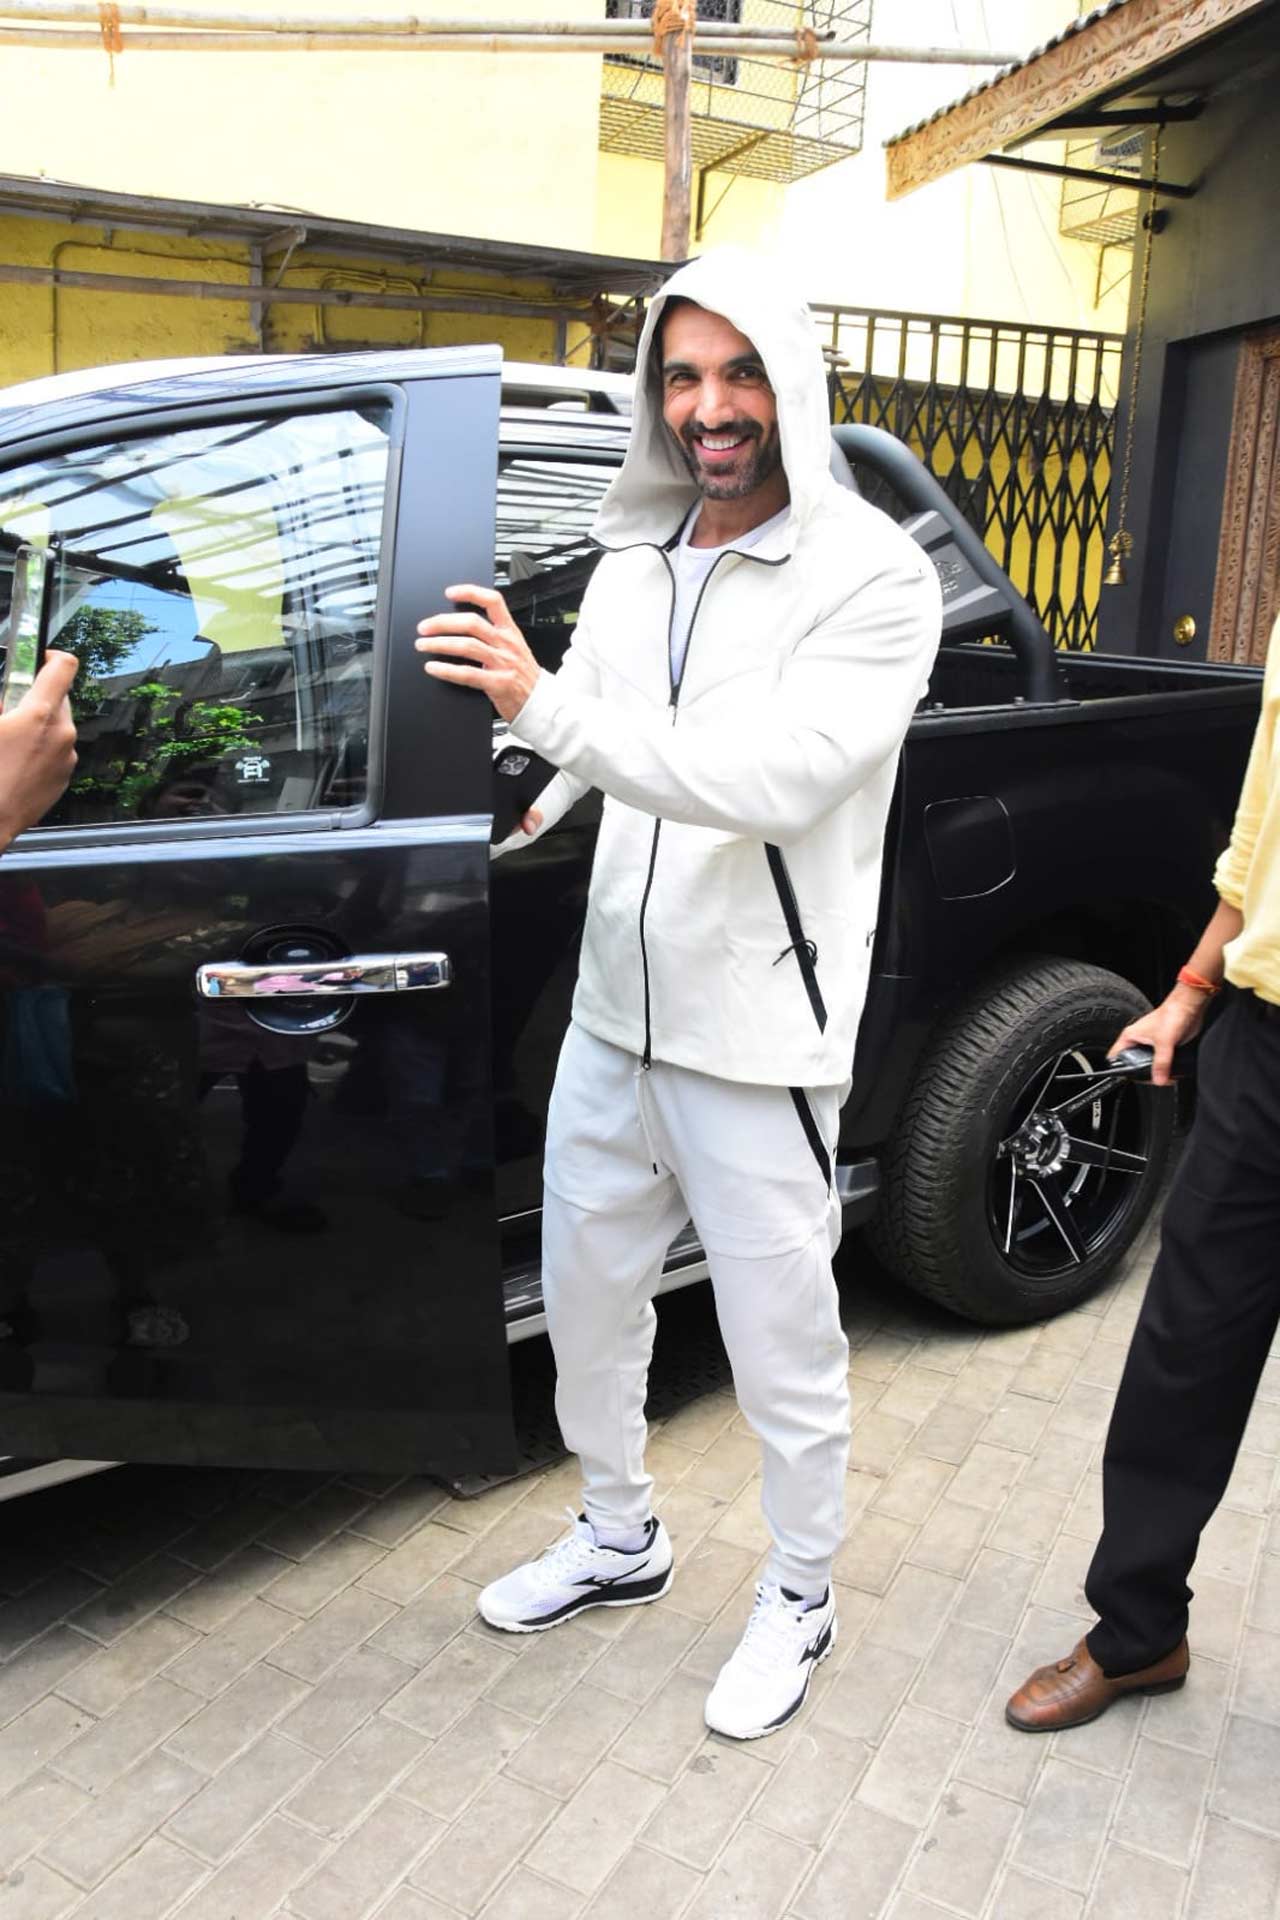 John Abraham, who works out at the same gym where Riteish and Genelia are often spotted, was all smiles when clicked in Bandra. On the work front, John has Satyameva Jayate 2, which also stars Divya Khosla Kumar playing a pivotal role among others.